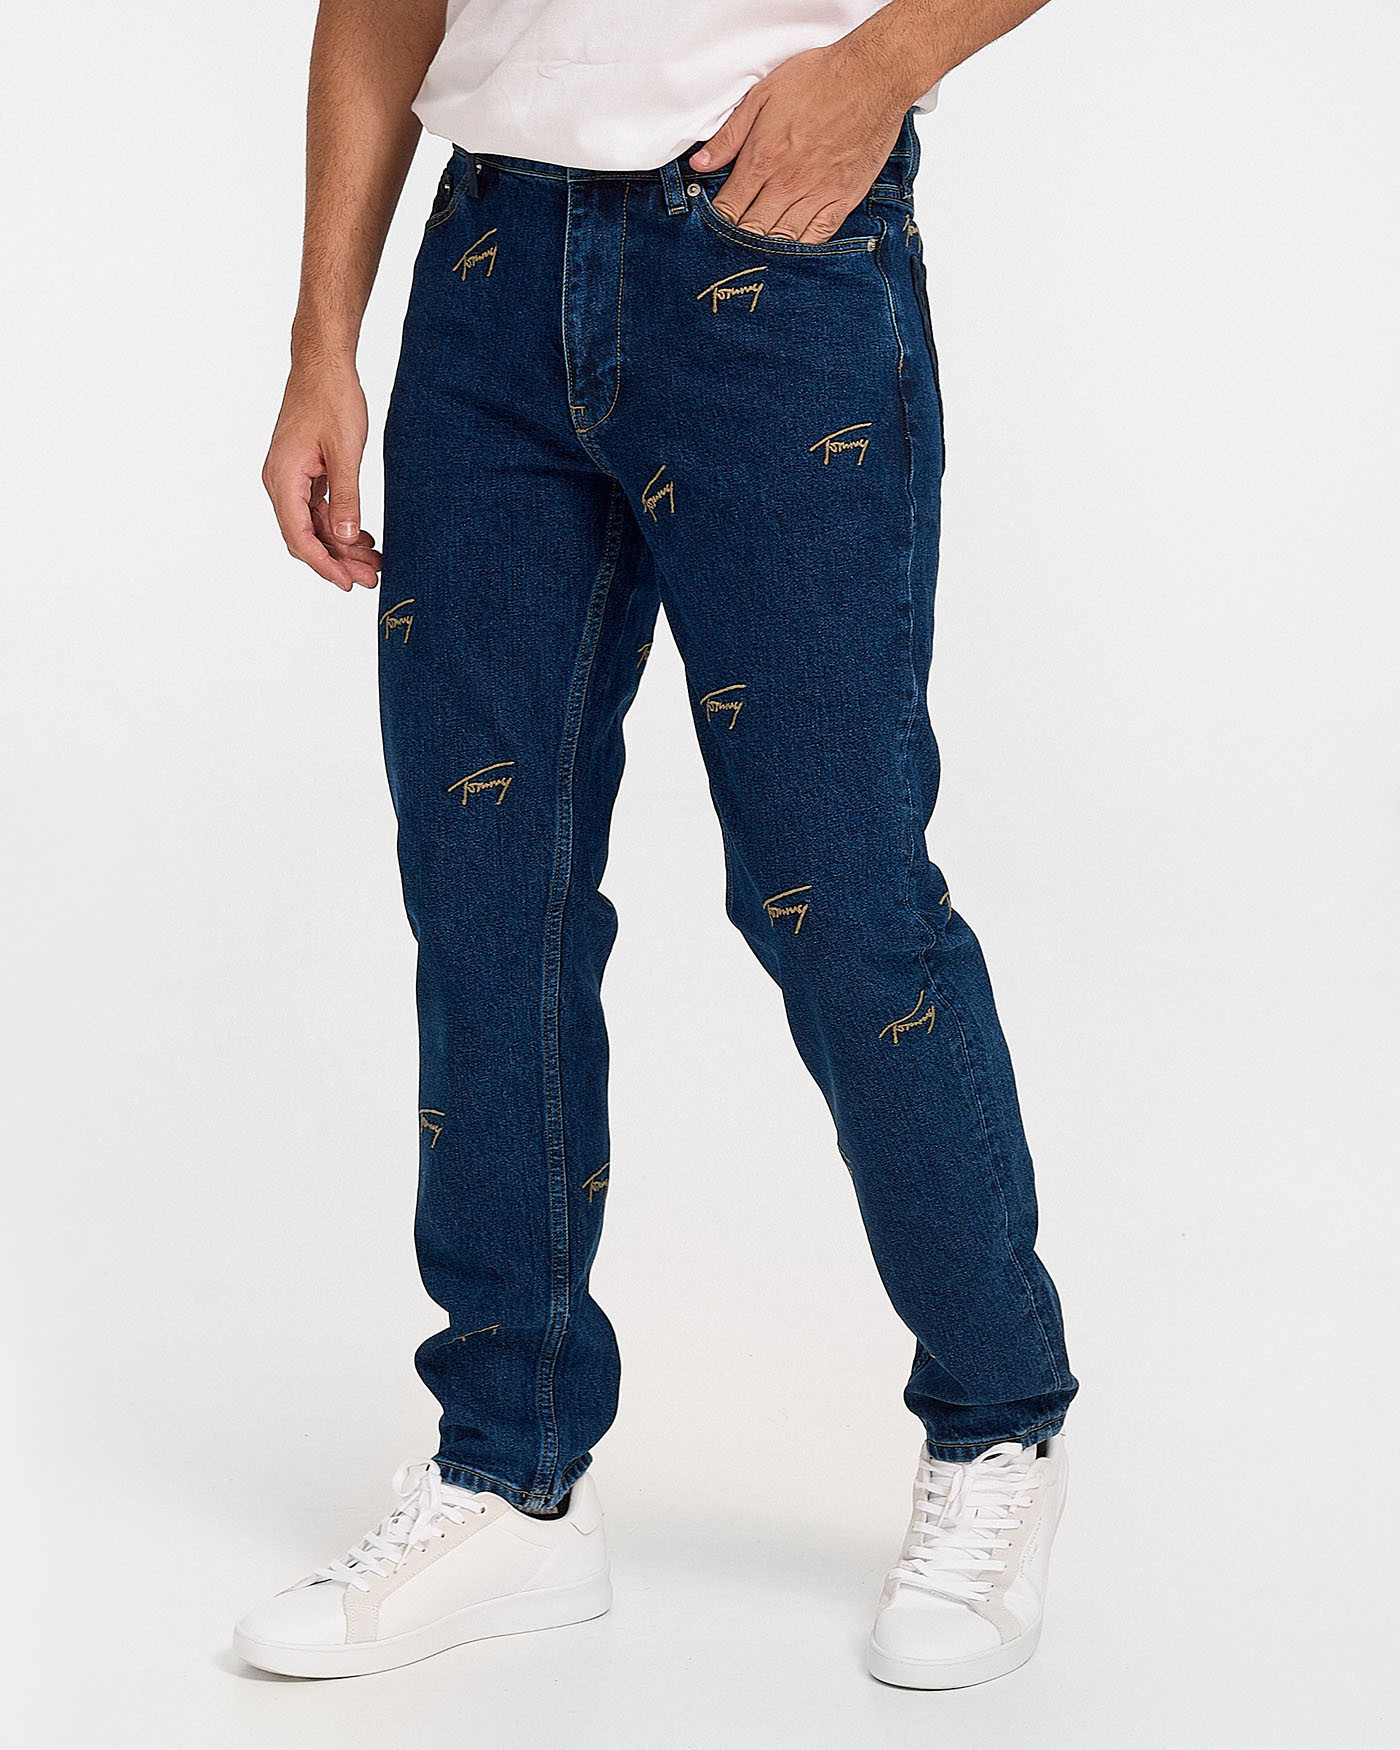 TOMMY HILFIGER DAD TAPERED LOGO EMBROIDERY JEANS - DM0DM11501